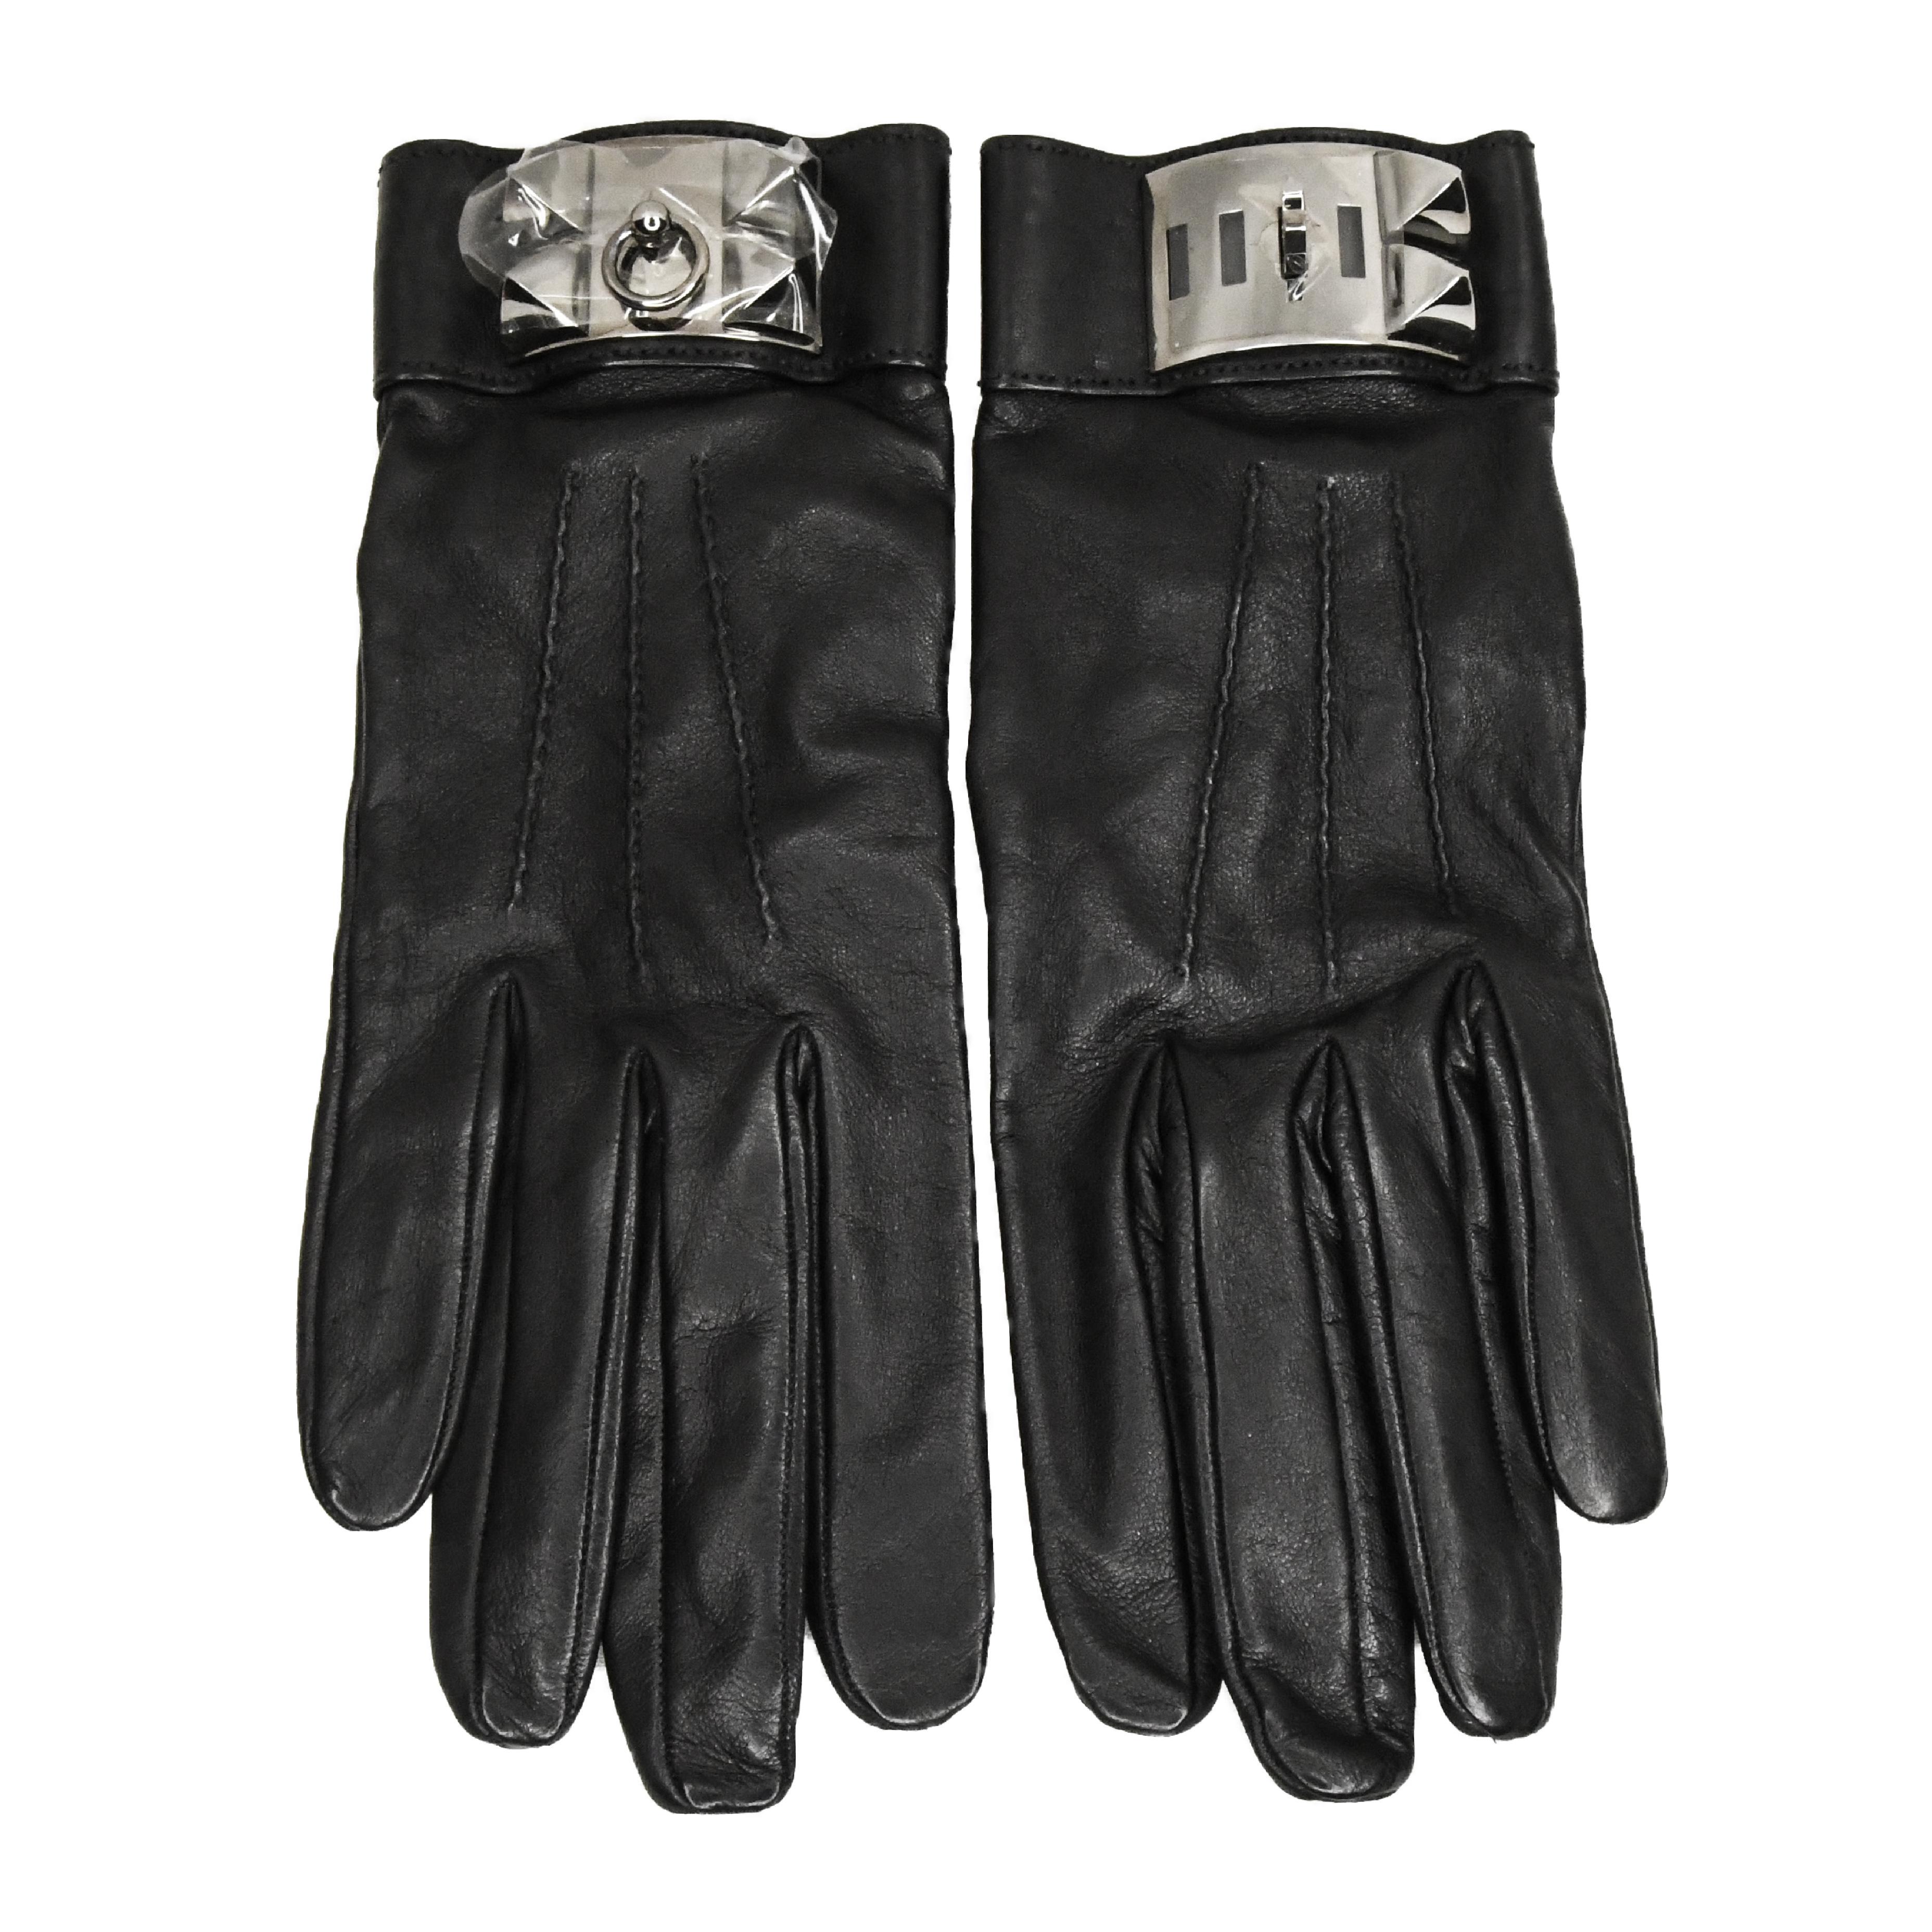 New In Box, black leather gloves are a must-have for any connoisseur of all things Hermès.  Features iconic Collier de Chien silvertone hardware sealed in original plastic.  Size 8.  New In Box.  Made in France.  